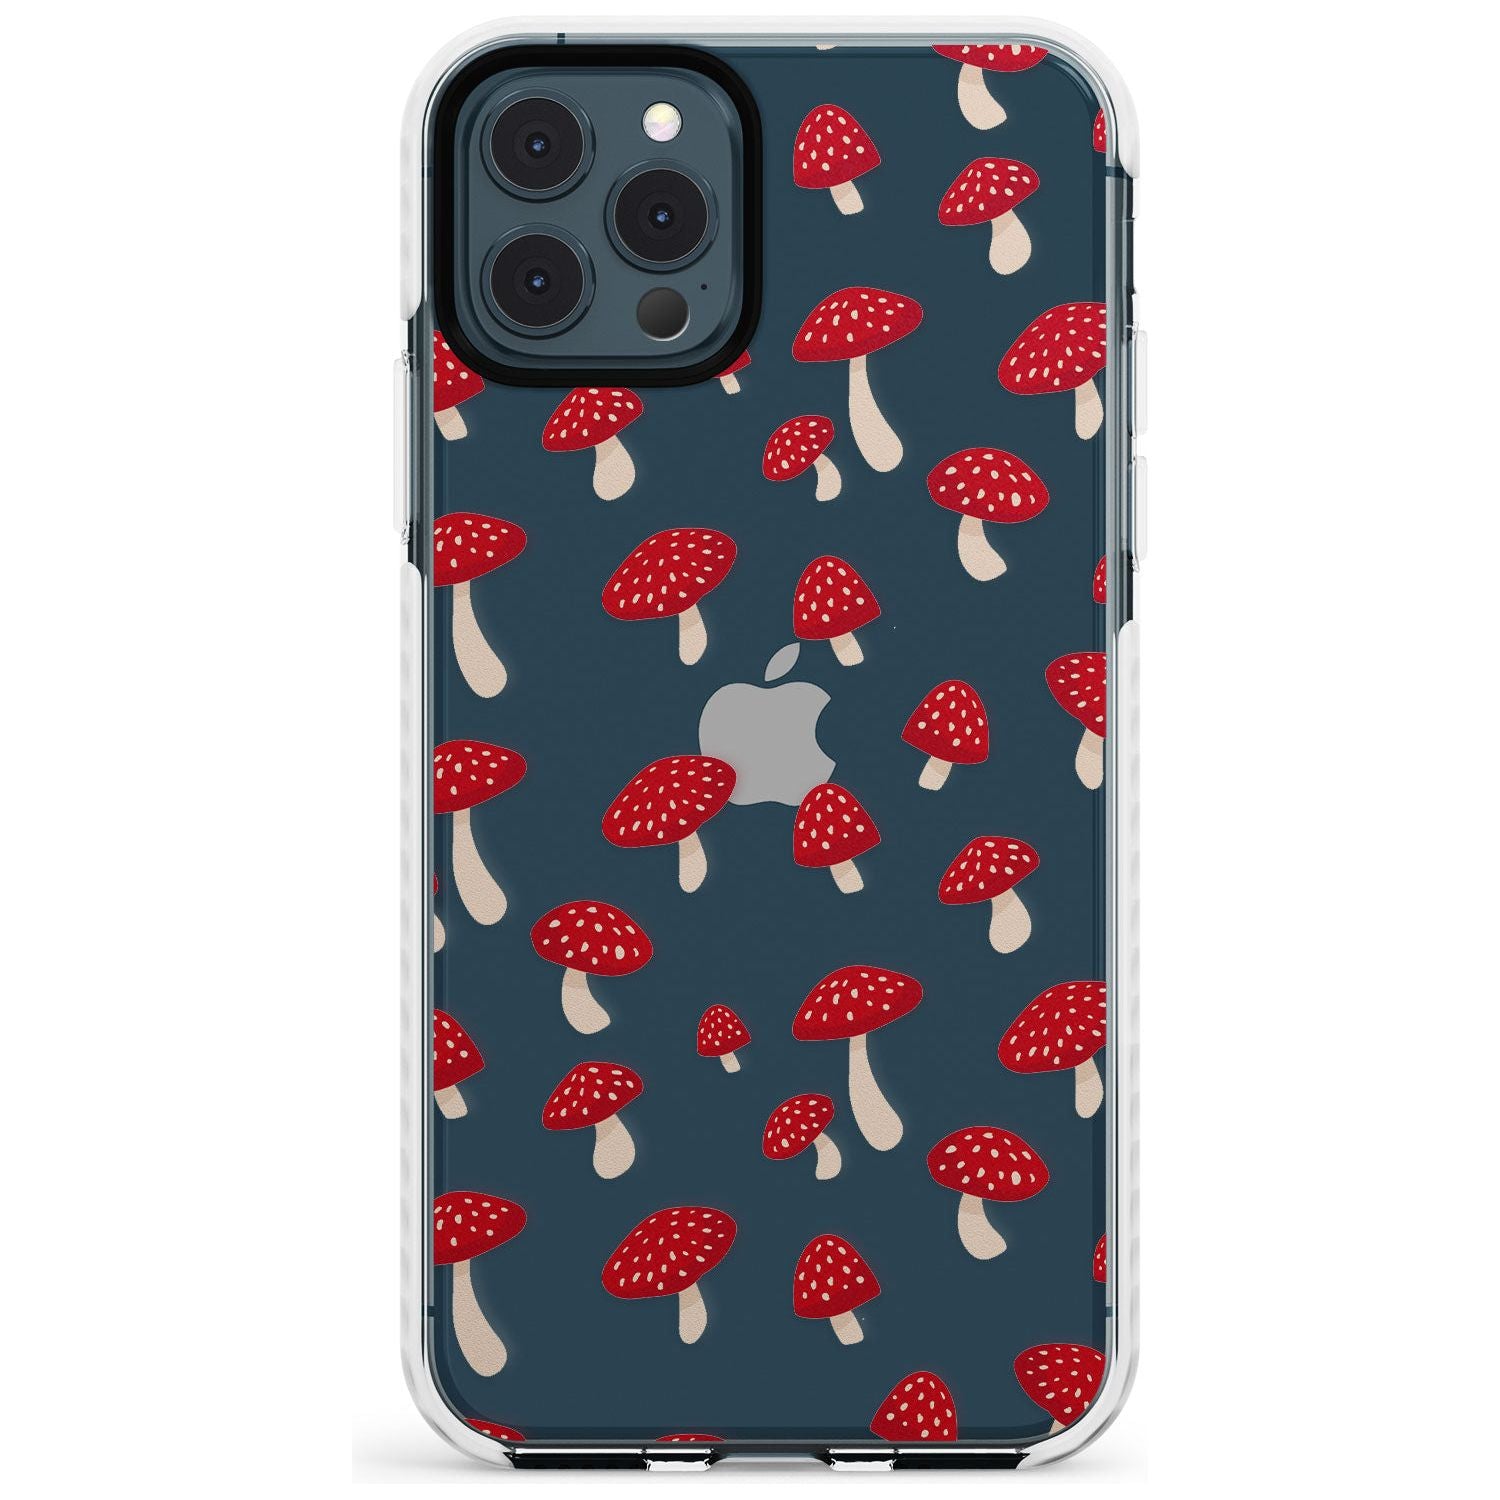 Magical Mushrooms Pattern Impact Phone Case for iPhone 11 Pro Max